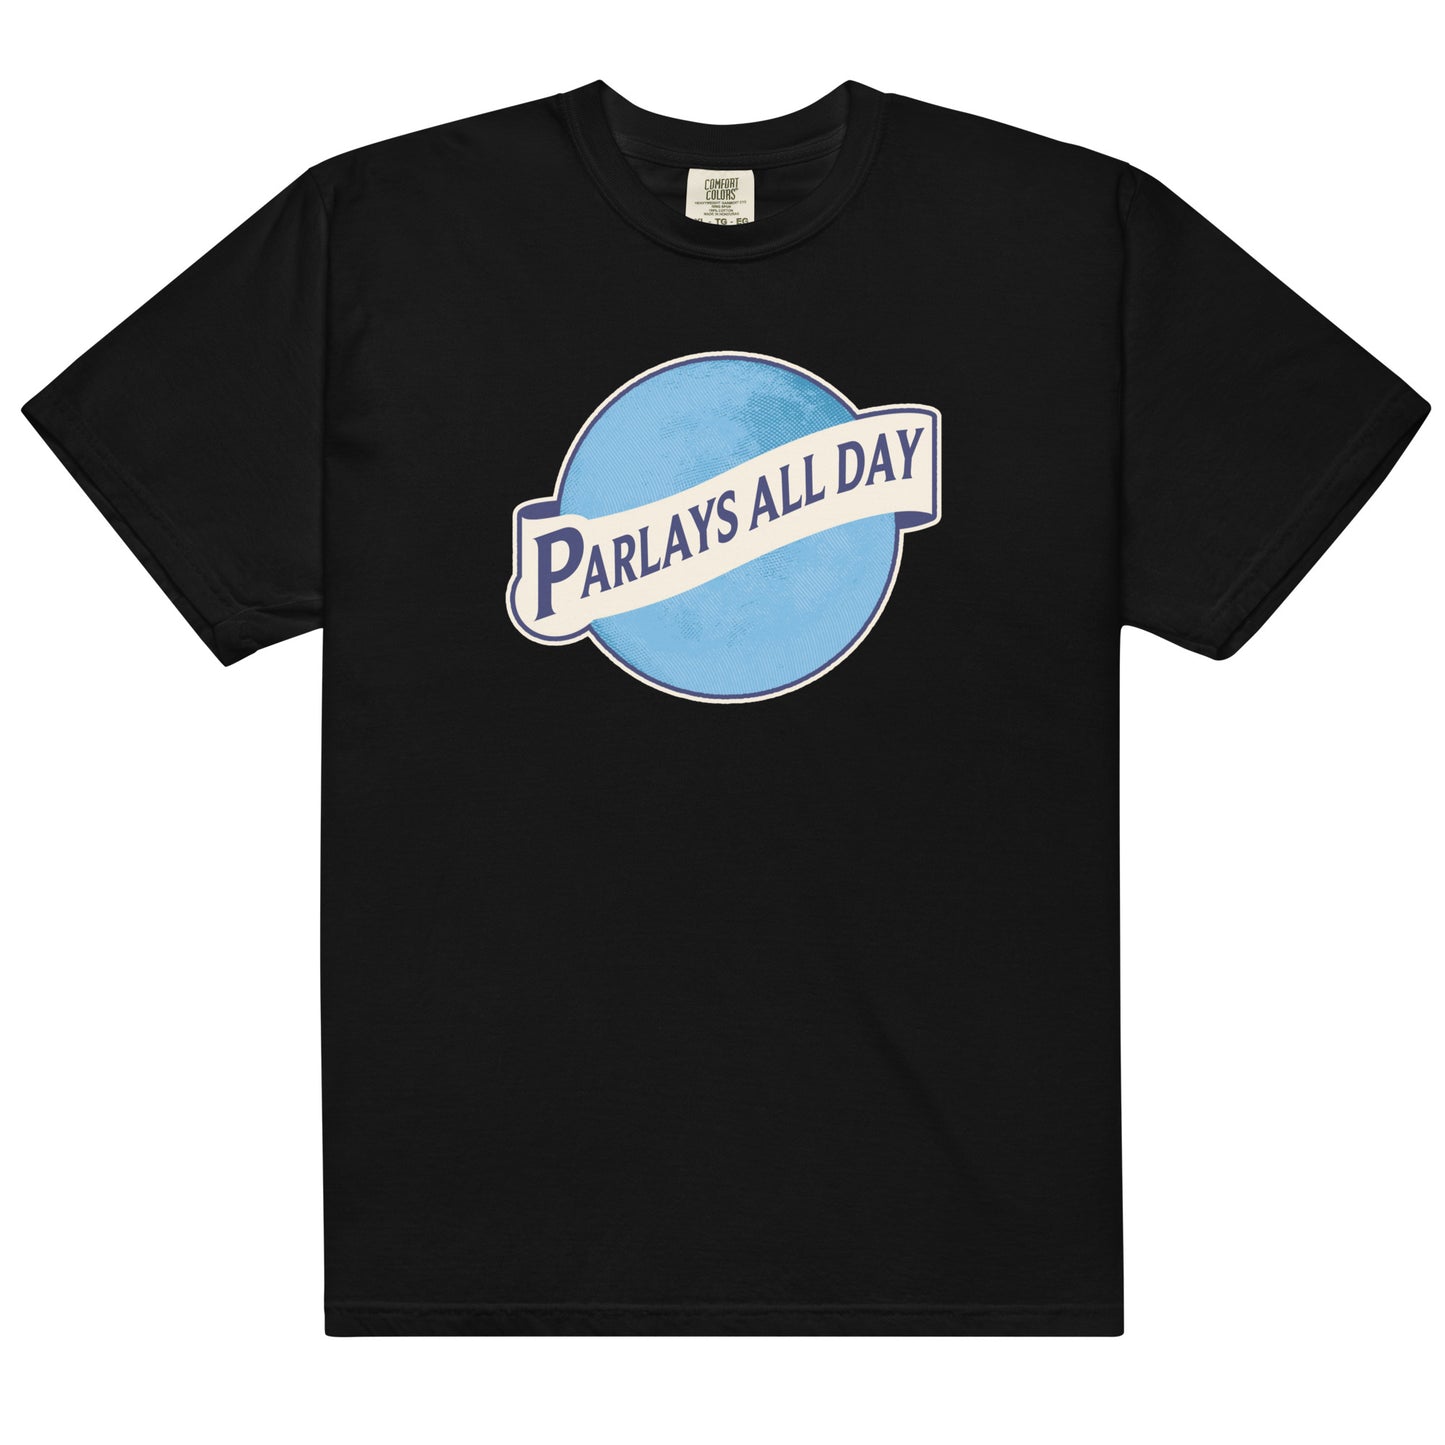 Parlays All Day Moon Tee